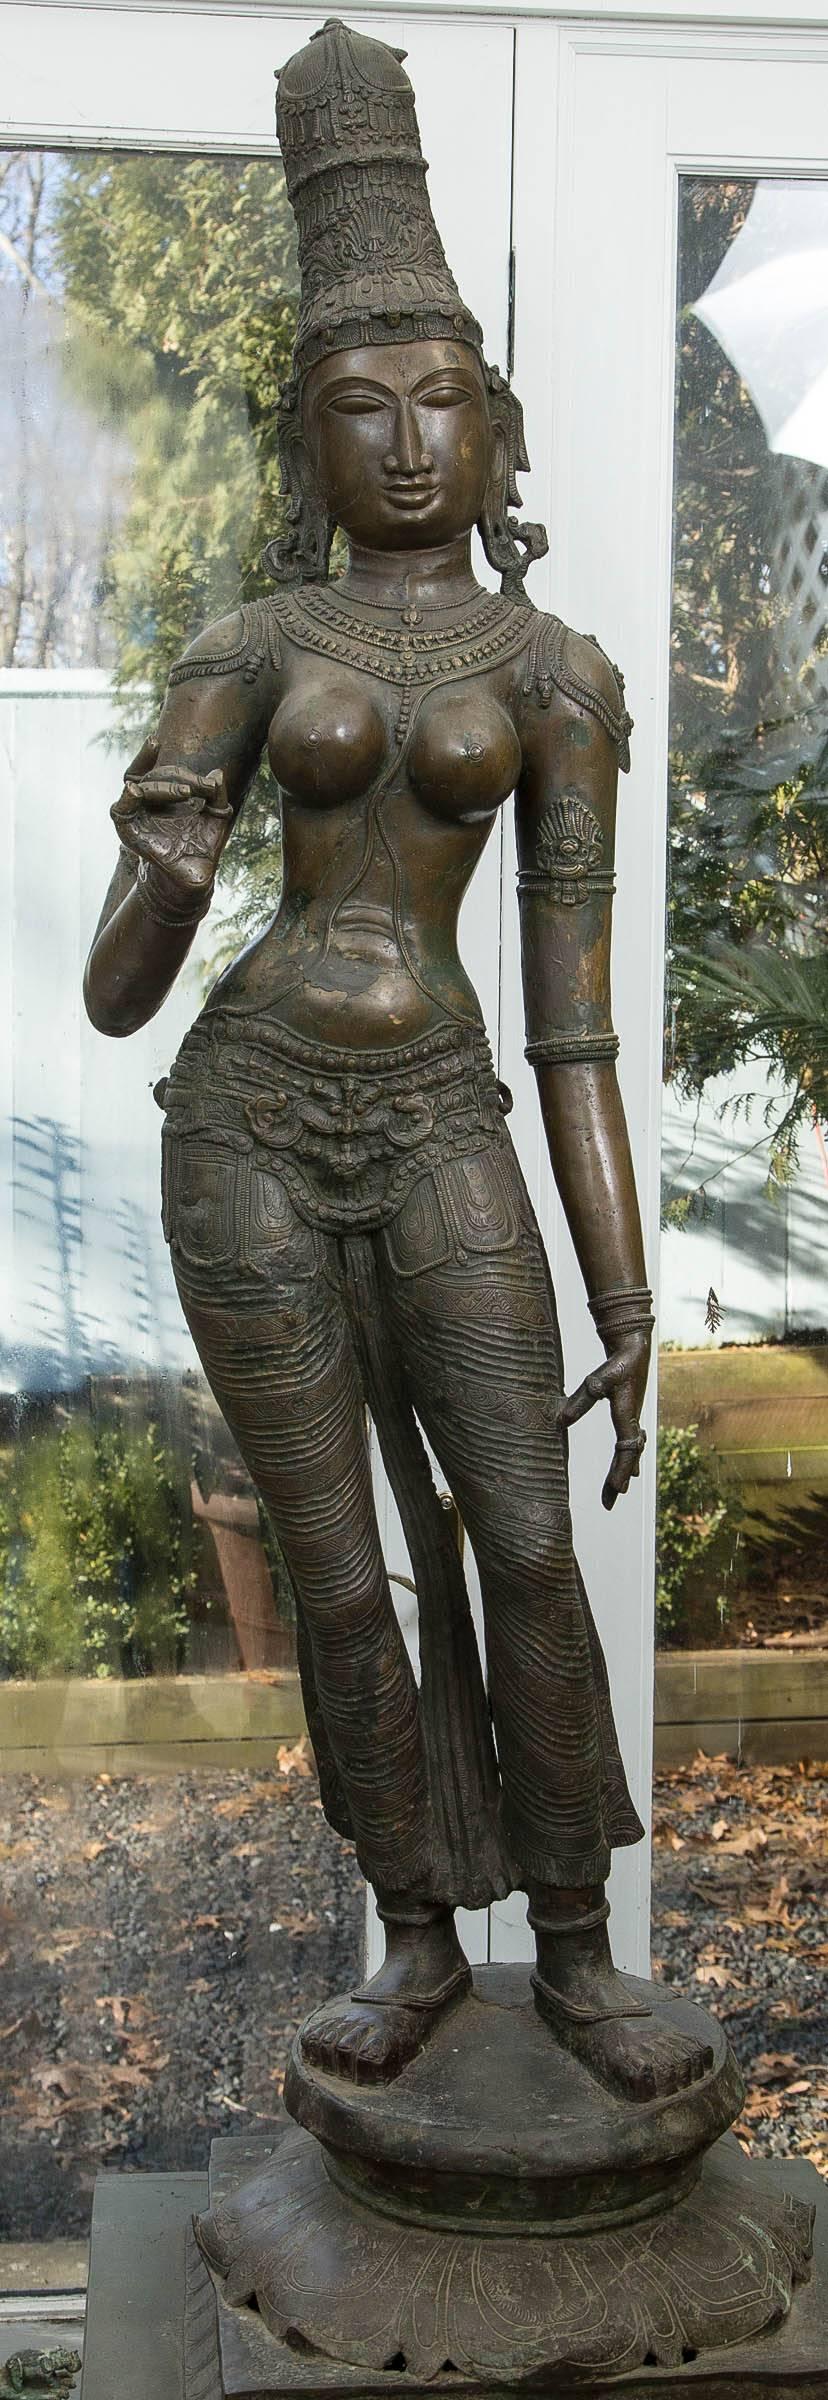 elegantly cast standing in a tribhangapose,  atop a  lotus base over a  waisted  plinth.  She is dressed  in a  long dhoti incised  with  foliate  patterns  tied  at the waist with a  pendant belt.  She is further adorned with beaded jewelry. An